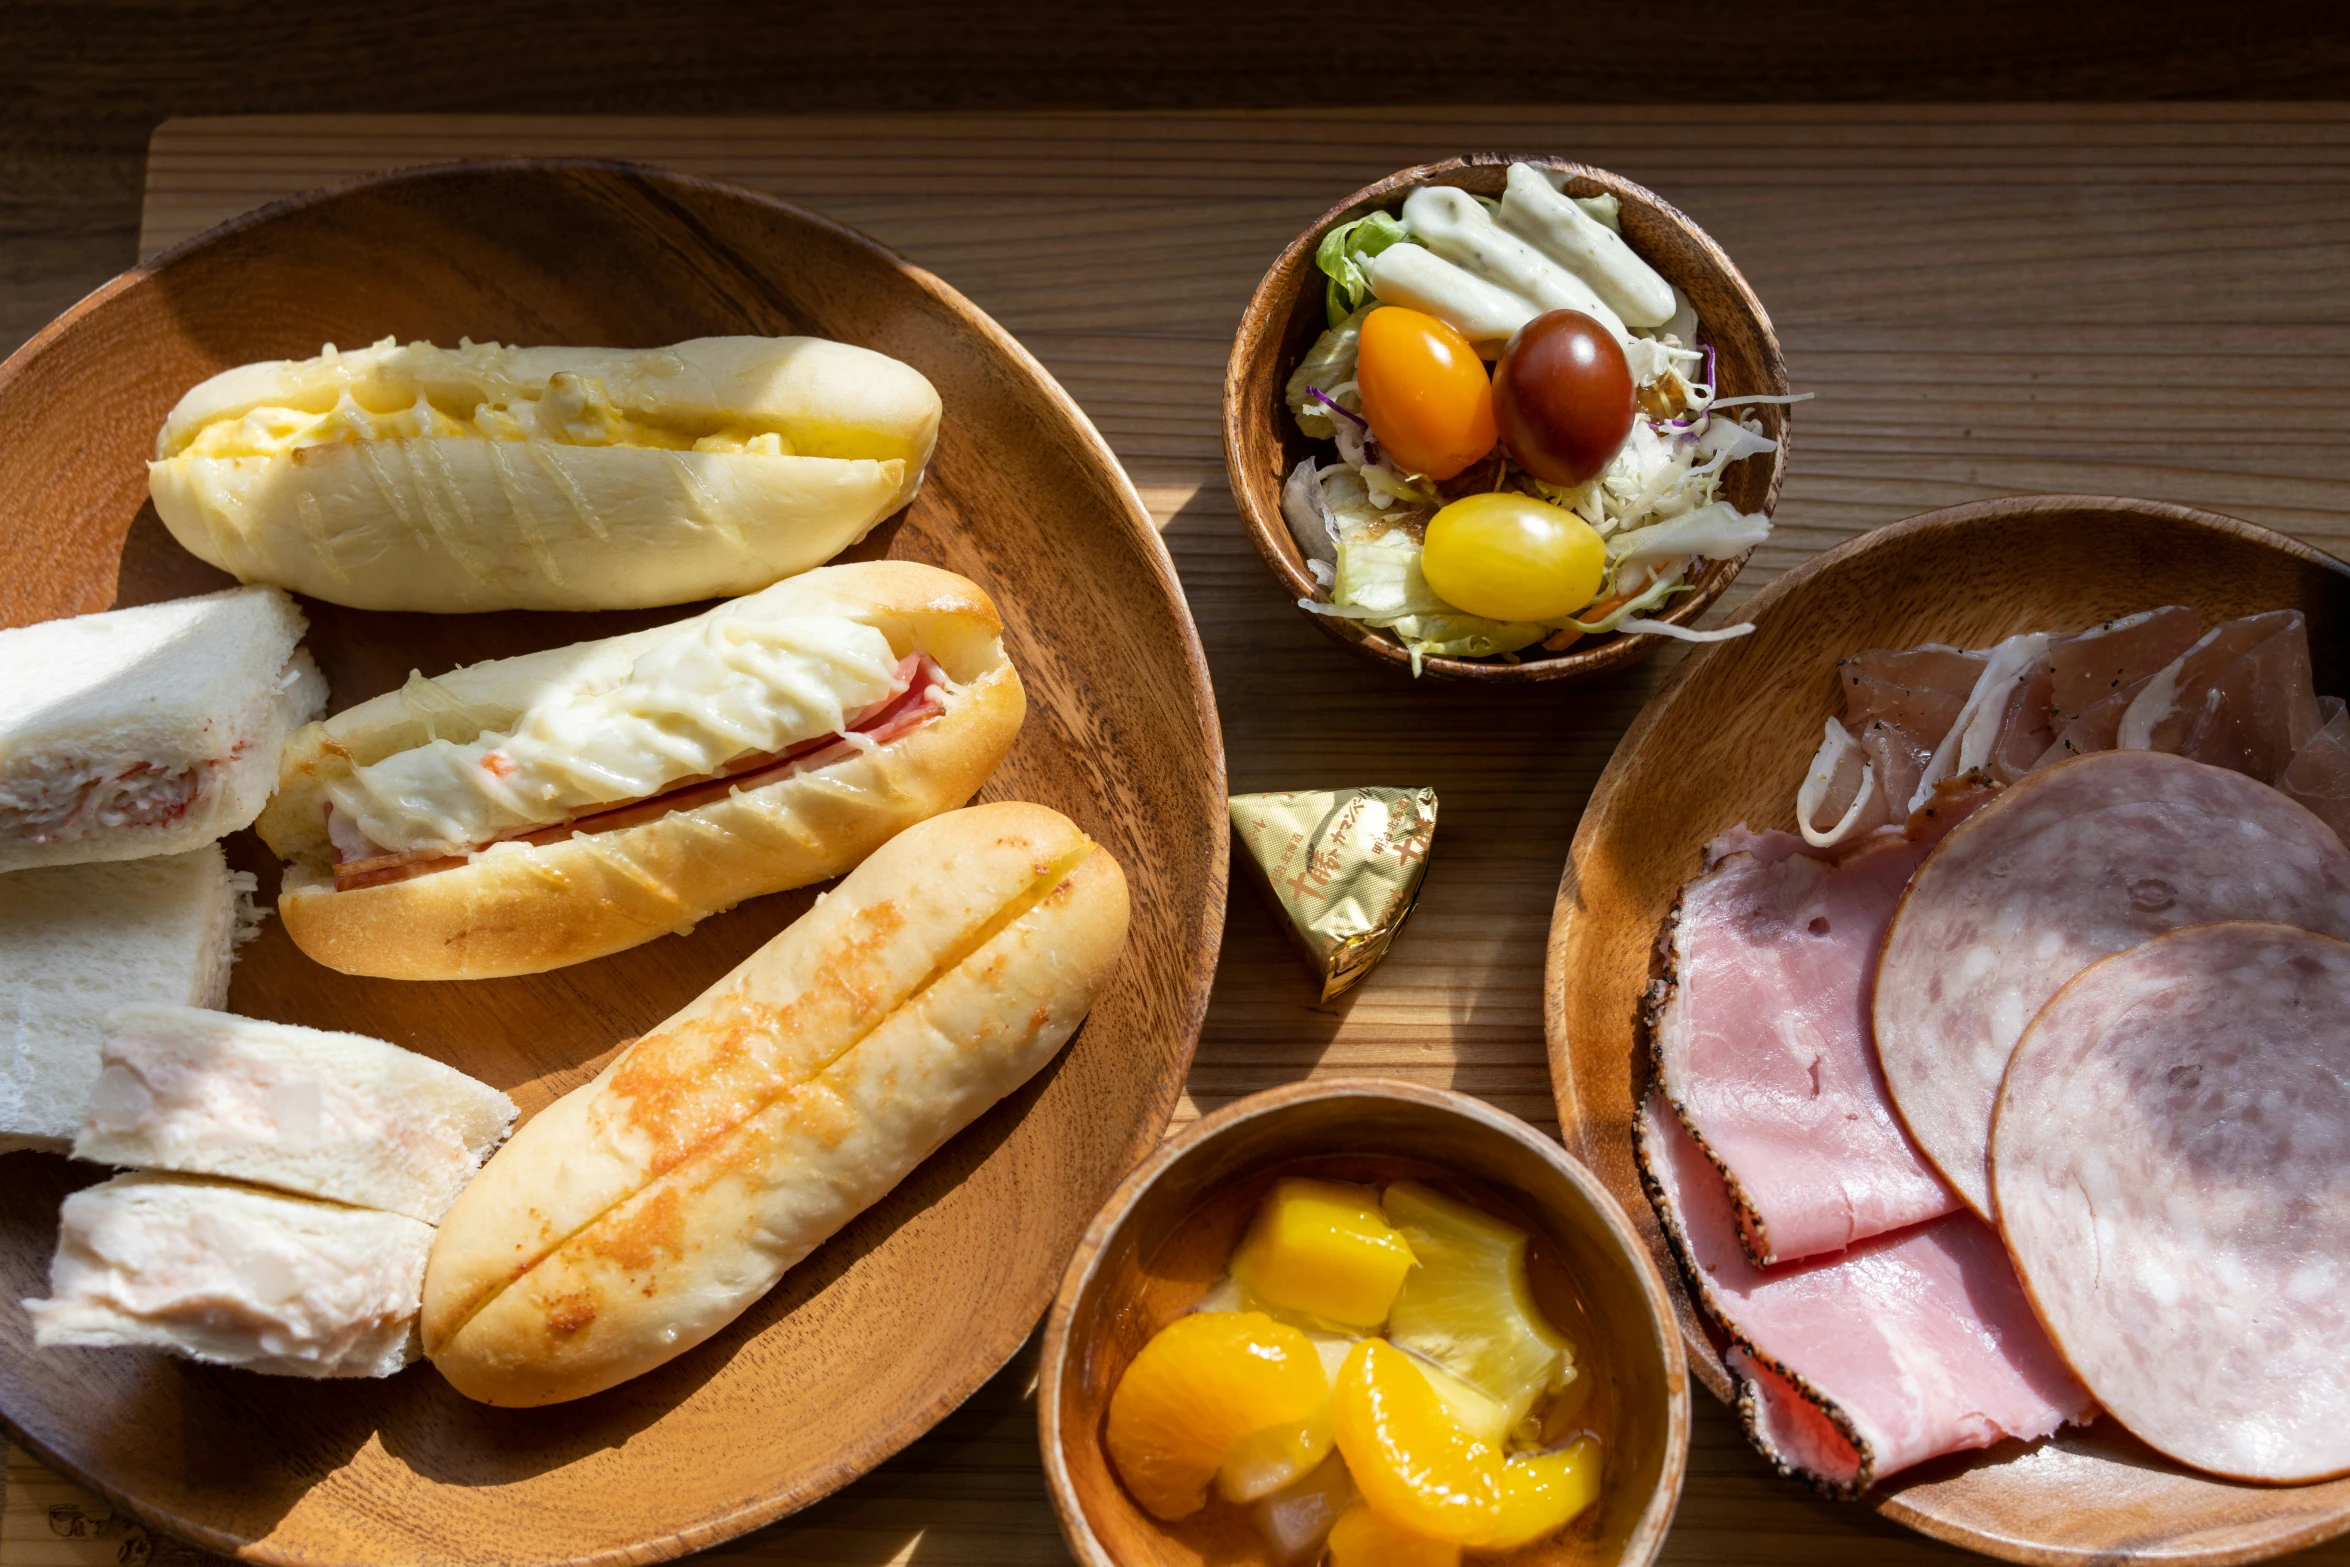 a table with two dishes containing meat and bread